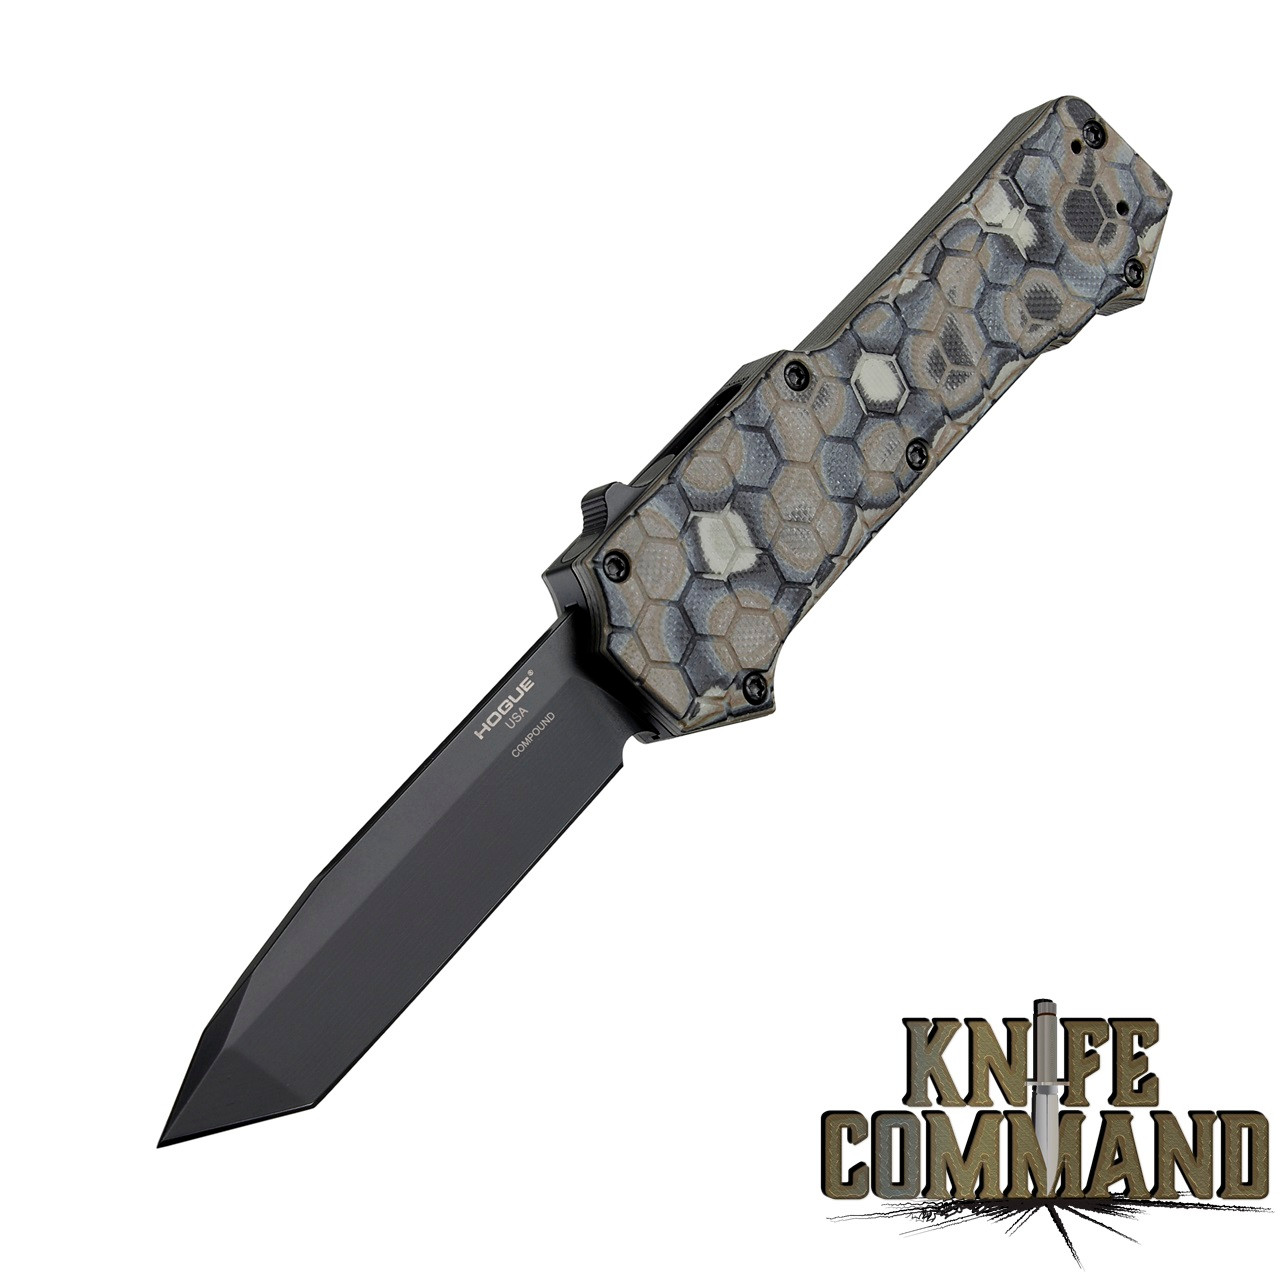 ogue Knives Compound OTF Automatic: 3.5" Tanto Blade - Black PVD Finish, G-Mascus Dark Earth G10 Frame 34027